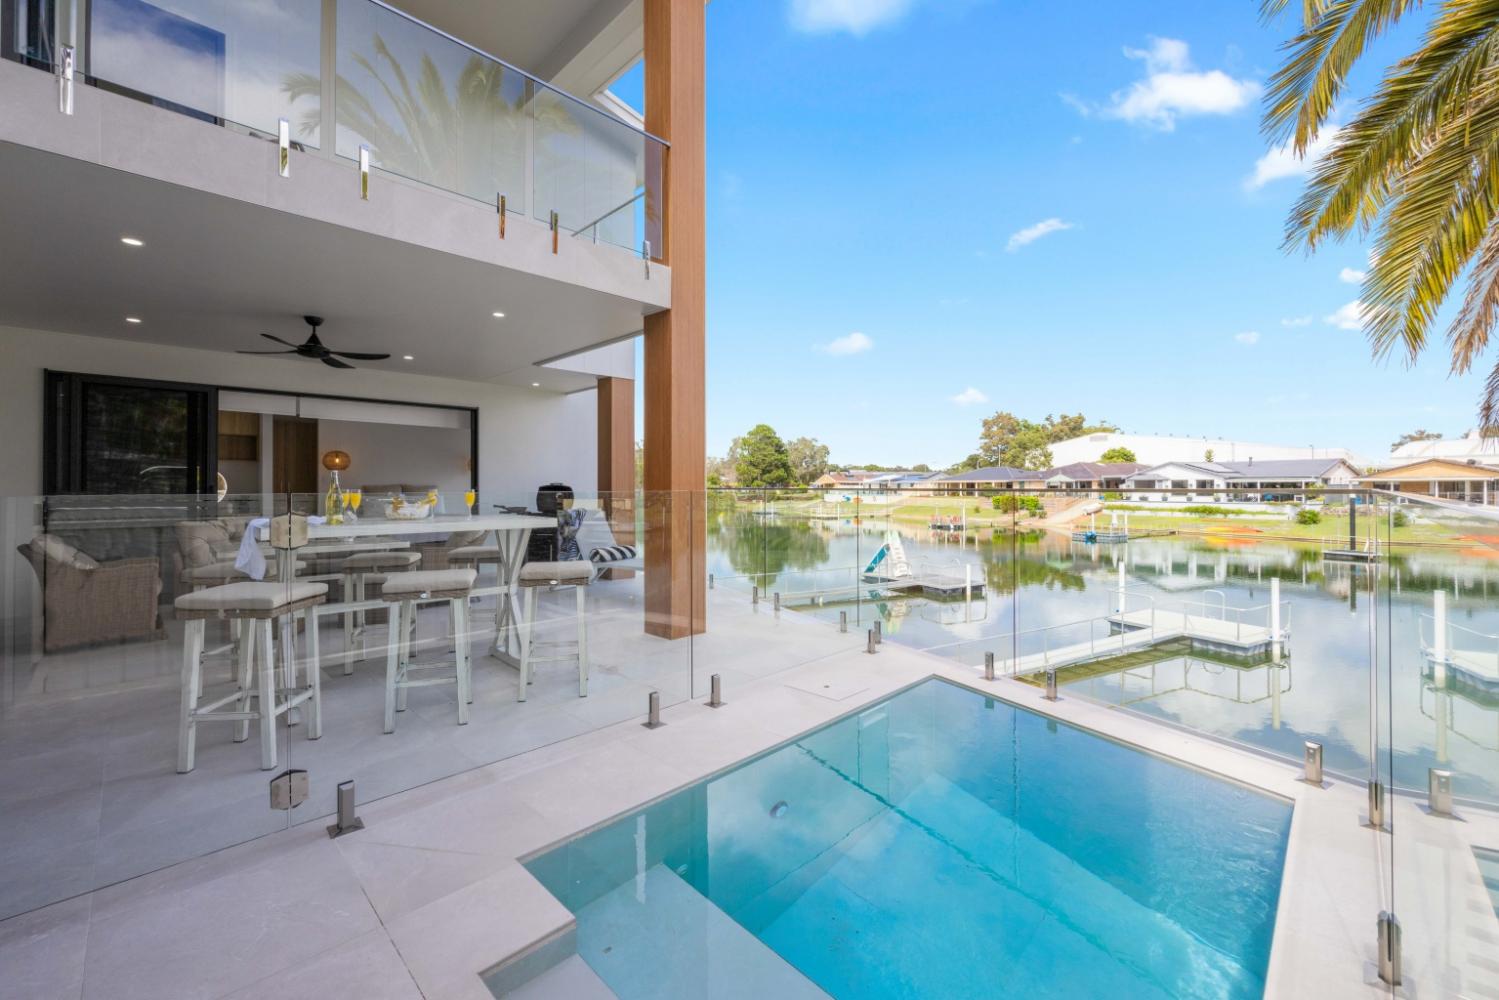 Plunge pool and outdoor living overlooking the canals. Hamiltons